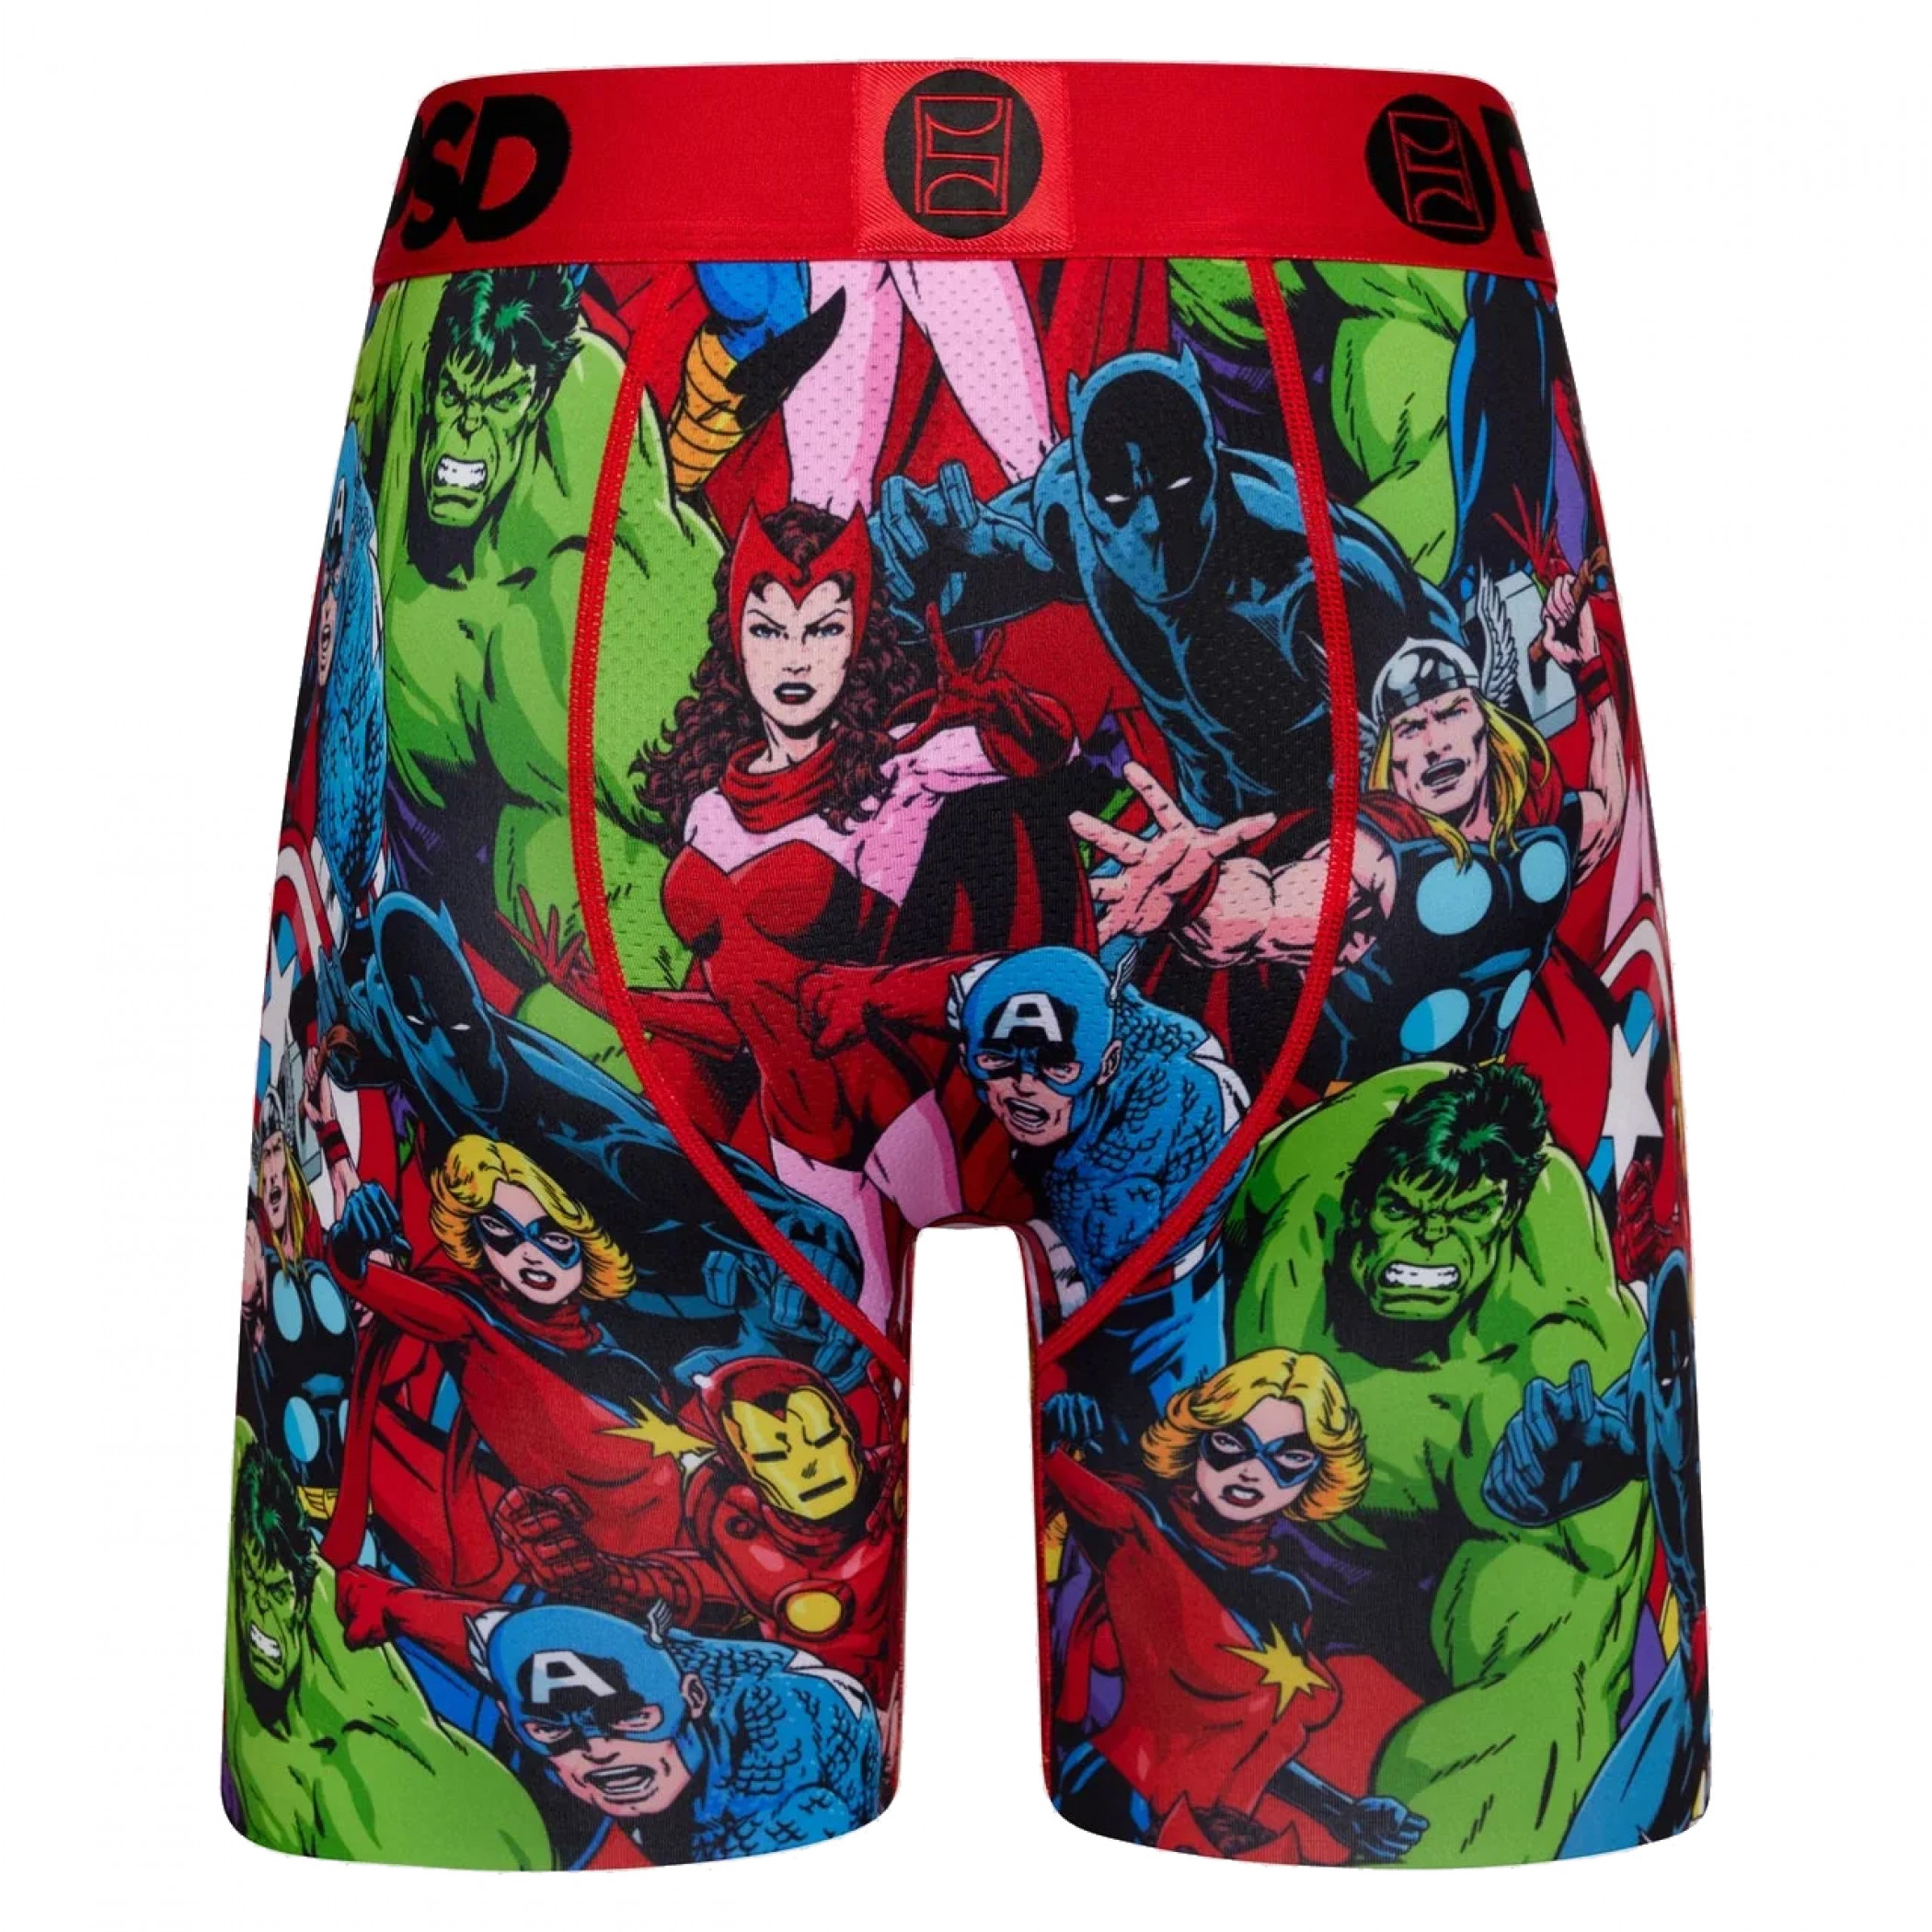 Avengers Heroes Collage PSD Boxer Briefs